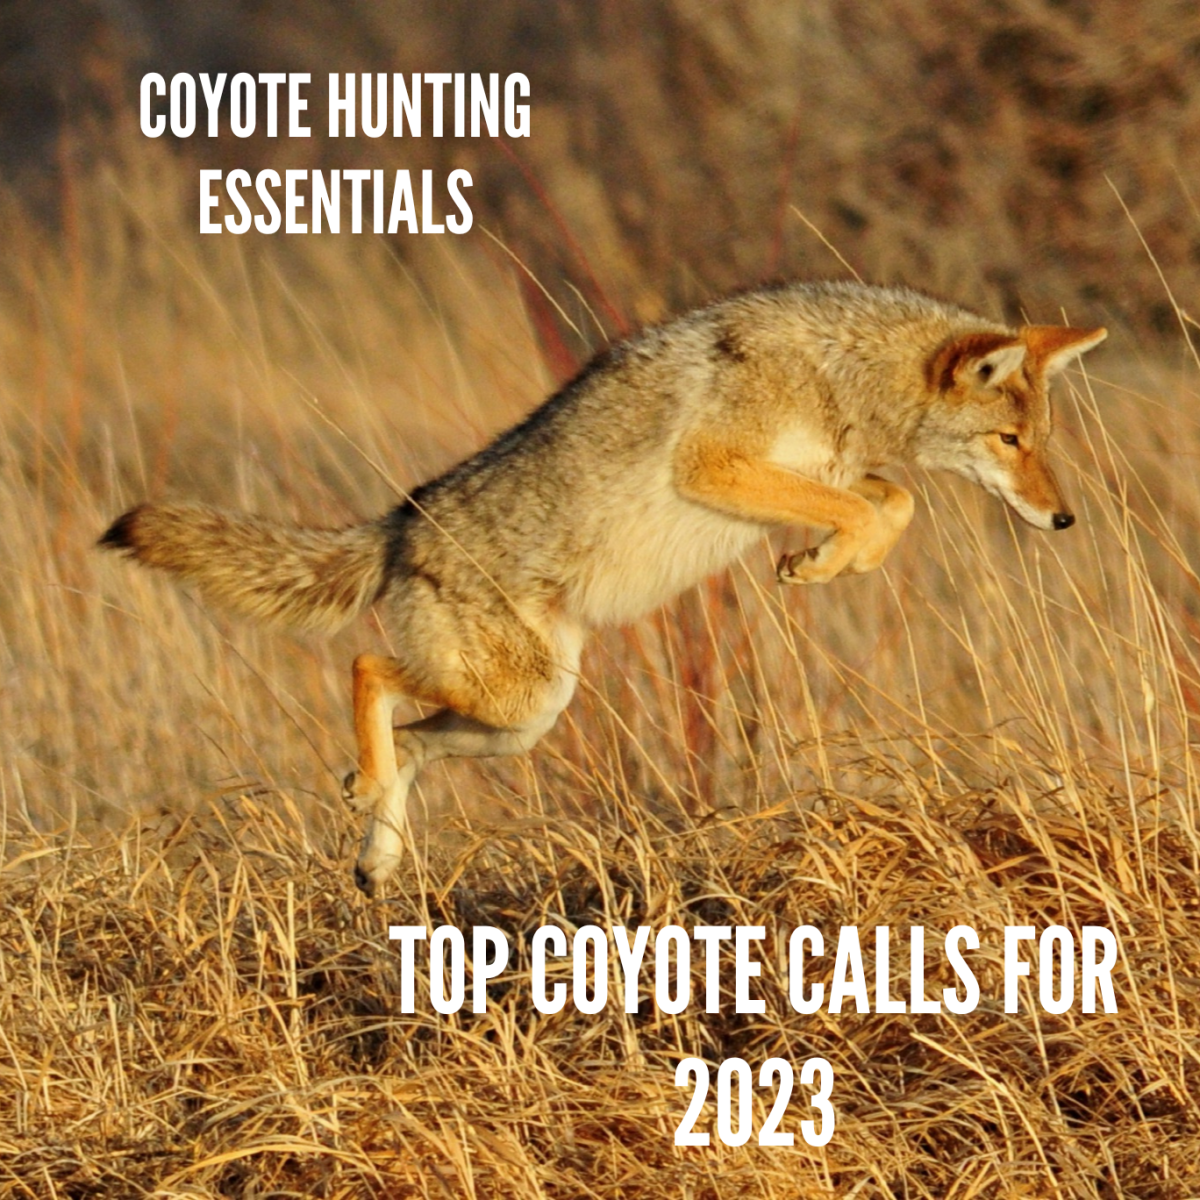 Coyote Hunting Gear: 3 Best Non-Electronic Predator Calls for 2023